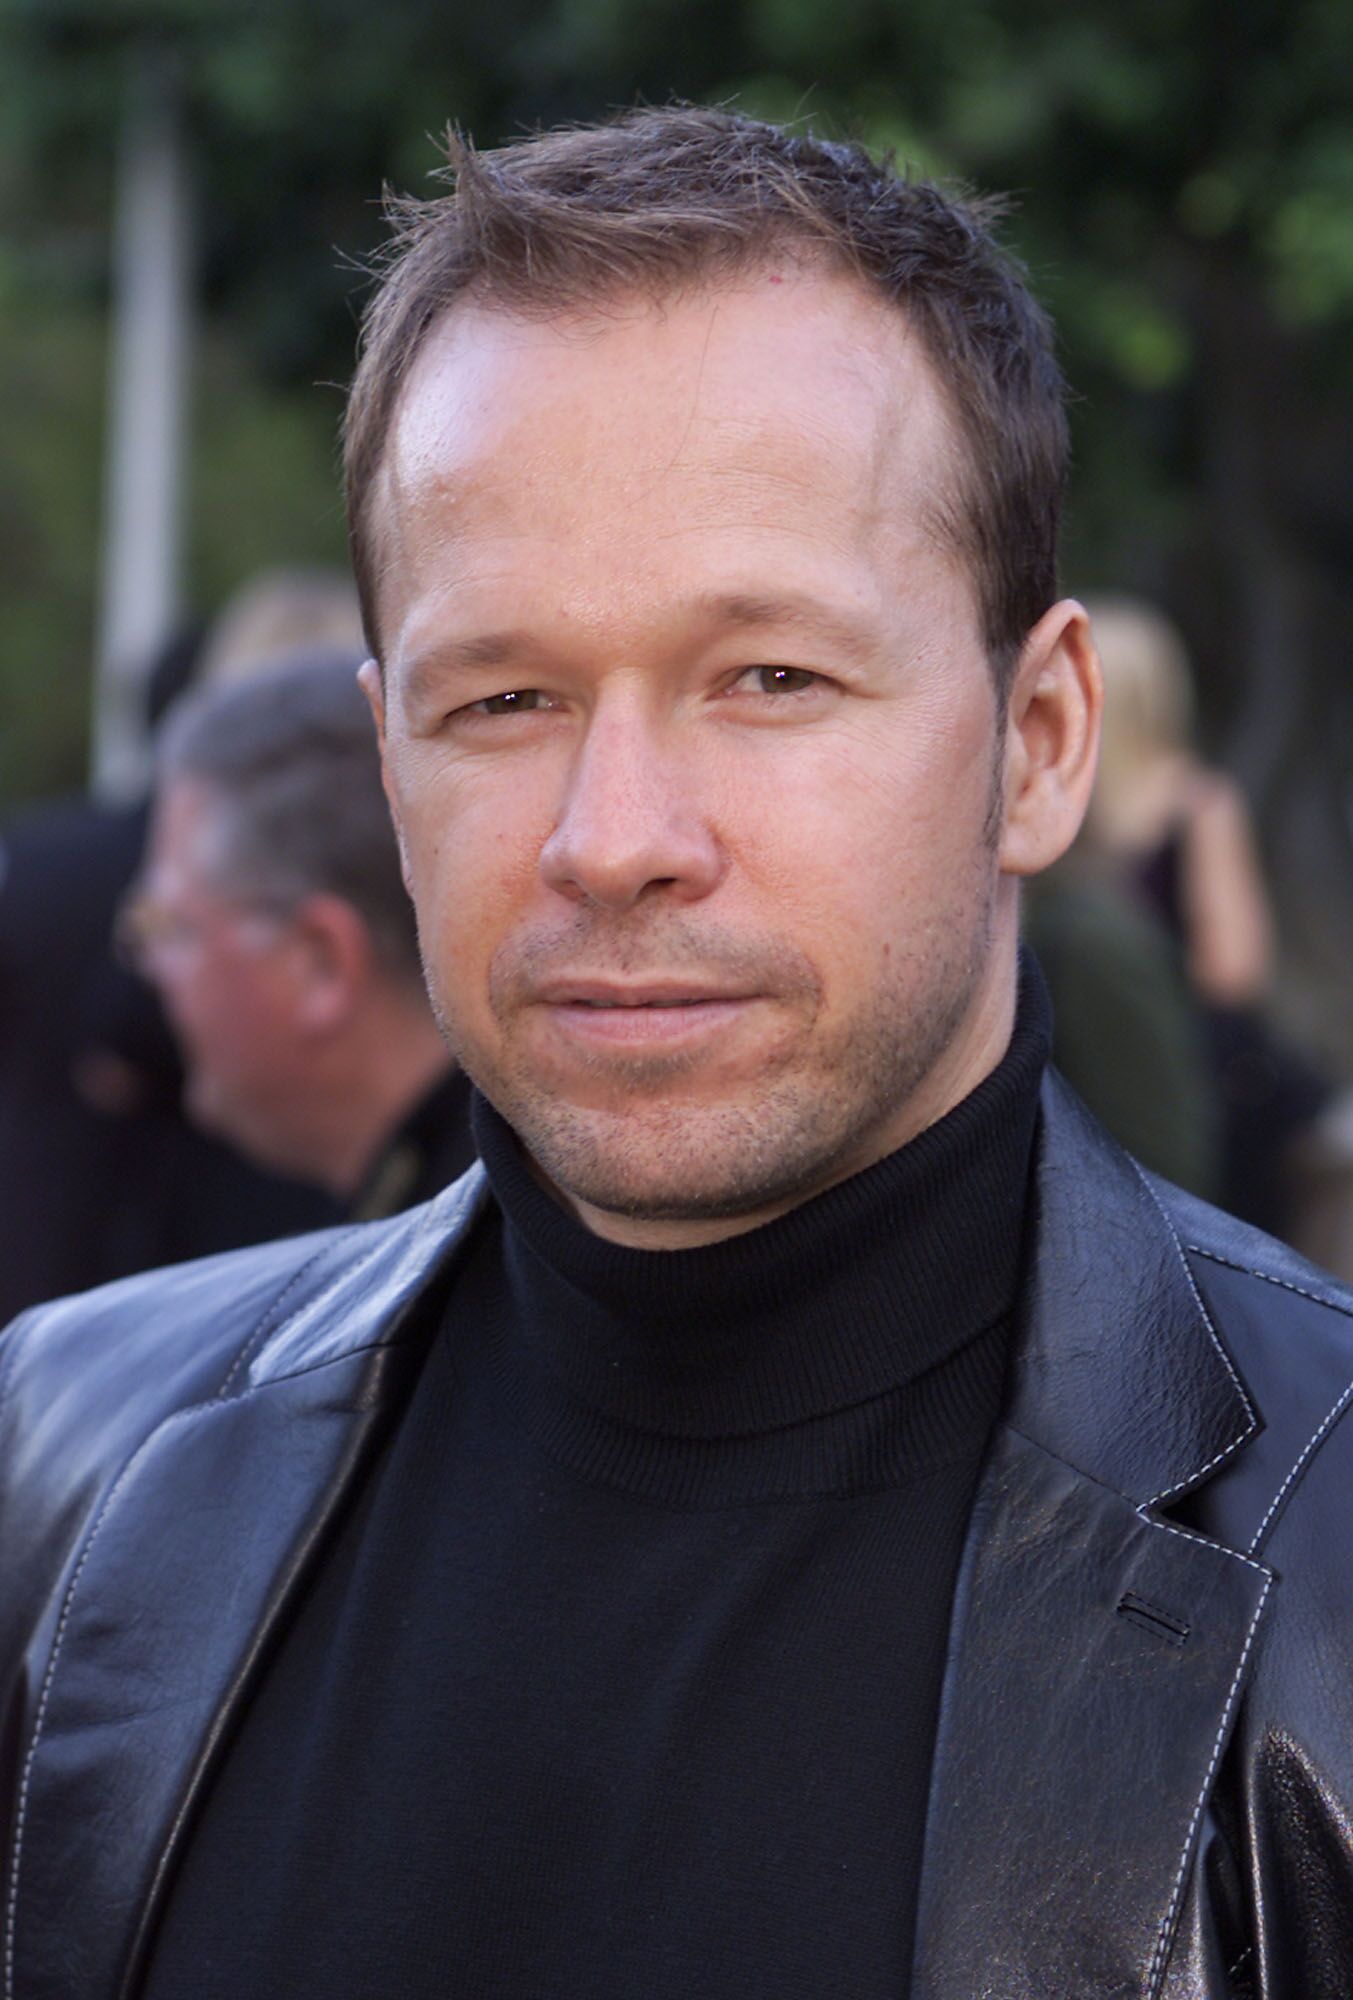 Donnie Wahlberg at the premiere of HBO's "Band of Brothers." | Source: Getty Images